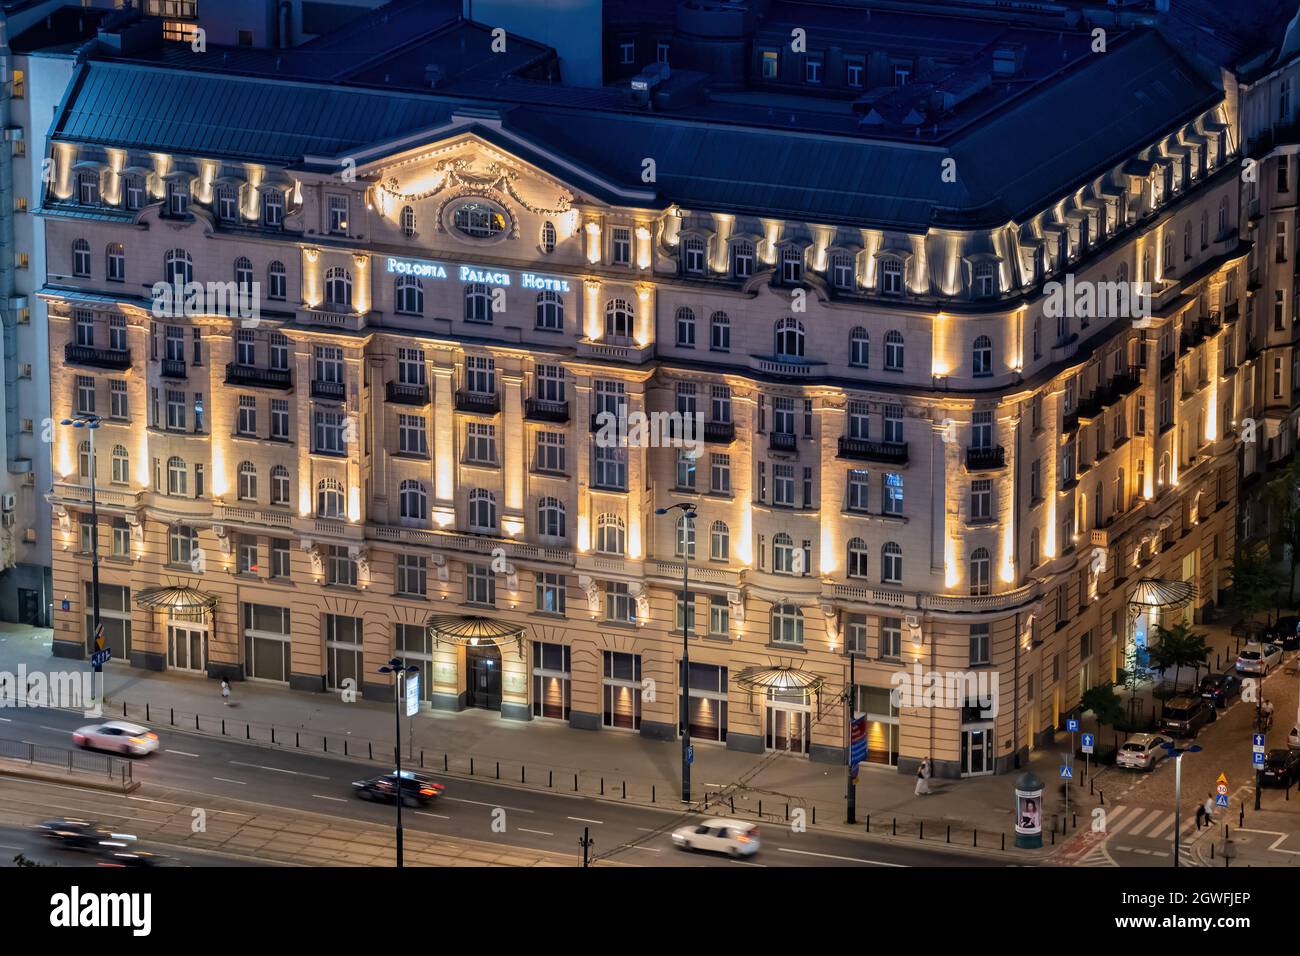 Hotel Polonia Palace illuminated at night in Warsaw Poland. Historic 4-star luxury accommodation in the city downtown. Stock Photo